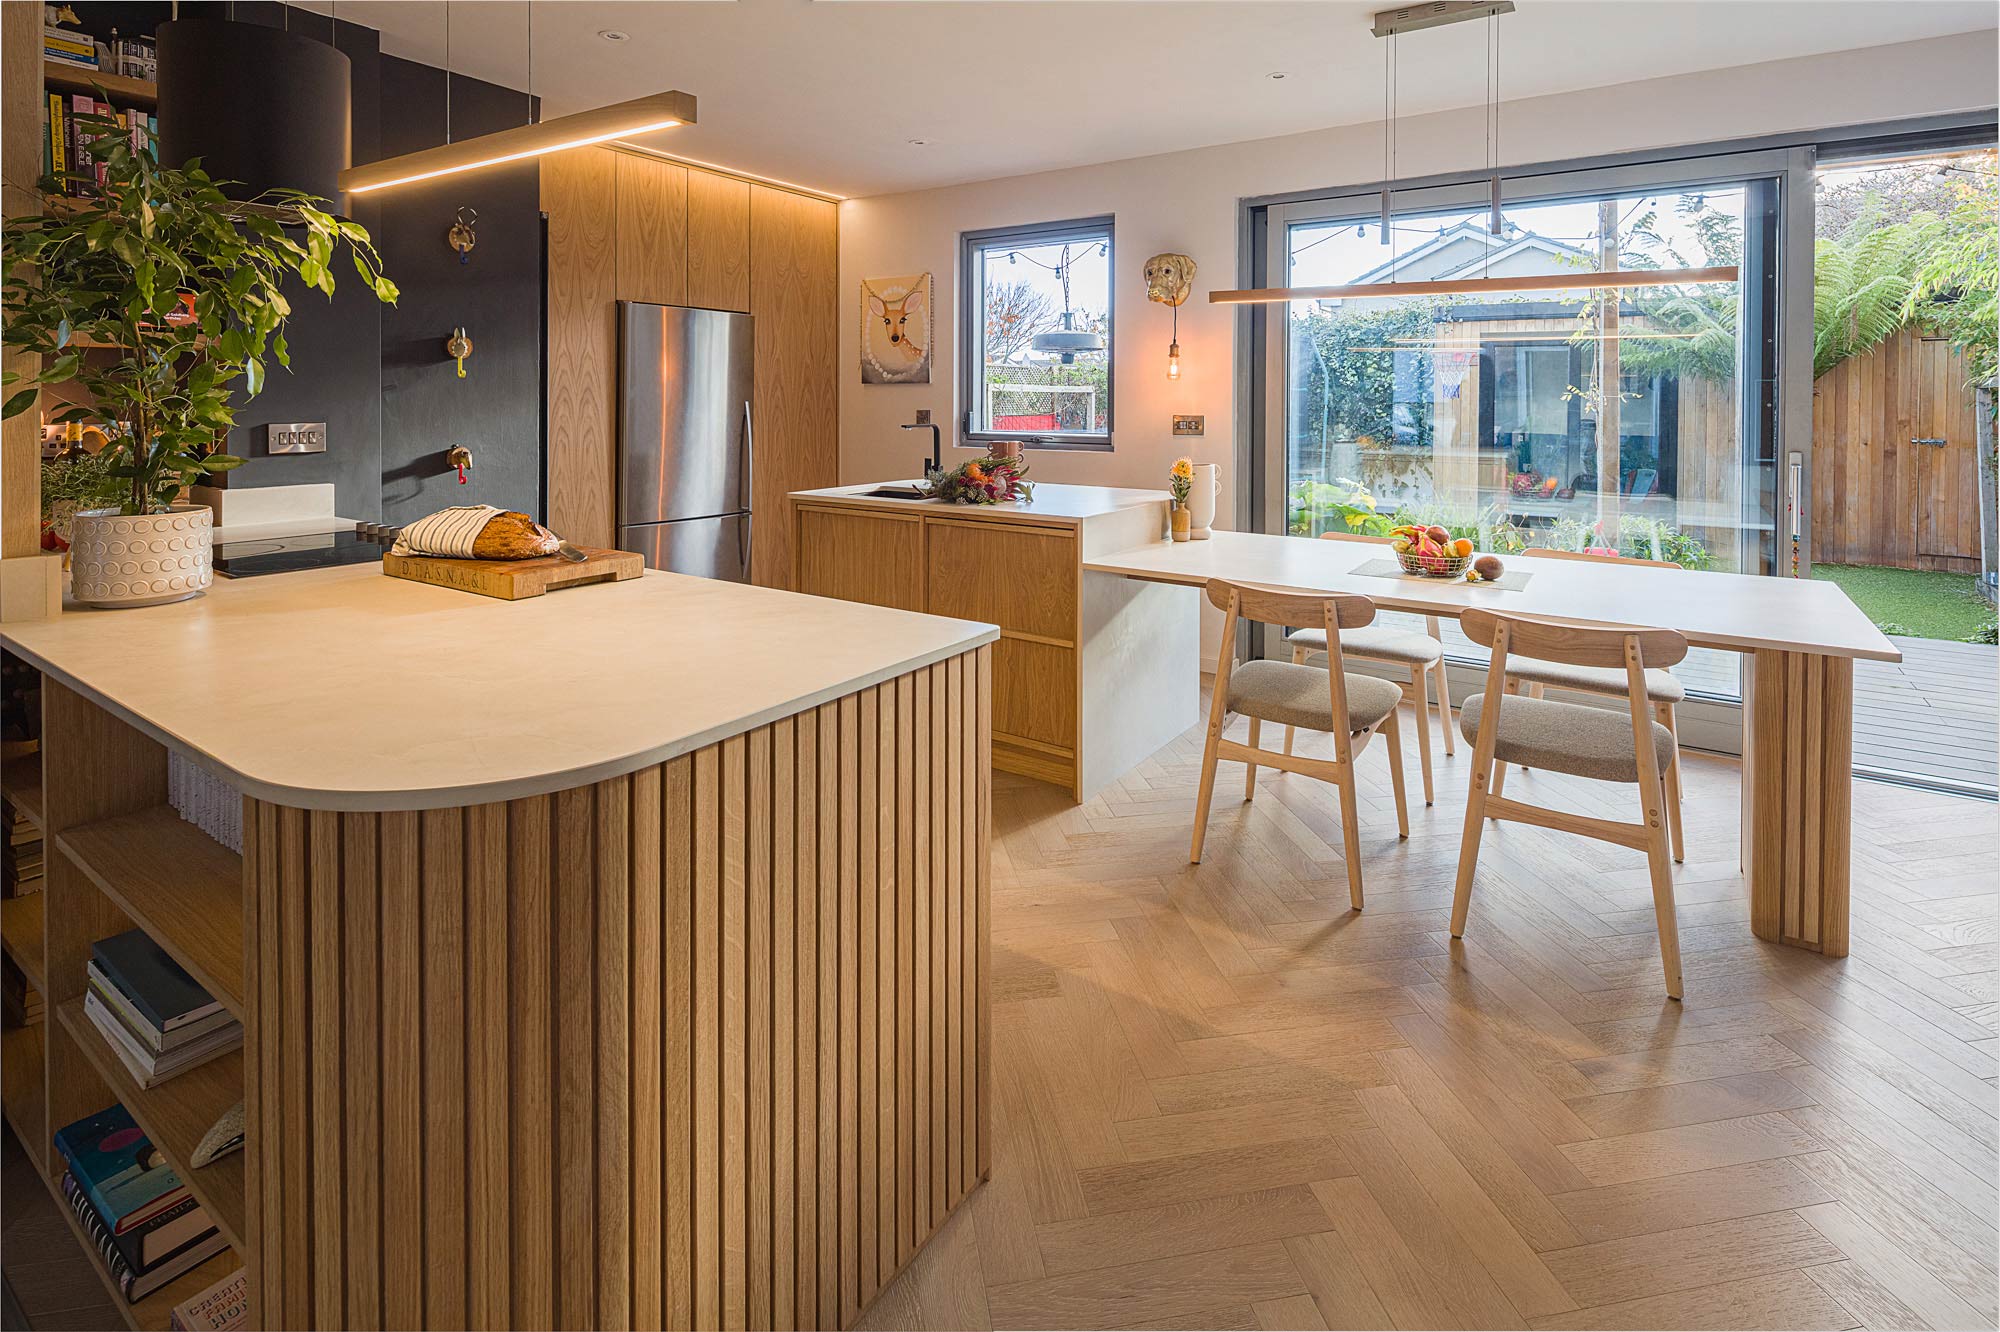 Image of Cosentino Dave Moore web 8 in A carbon-neutral worktop for a sustainable house that connects indoors and outdoors - Cosentino